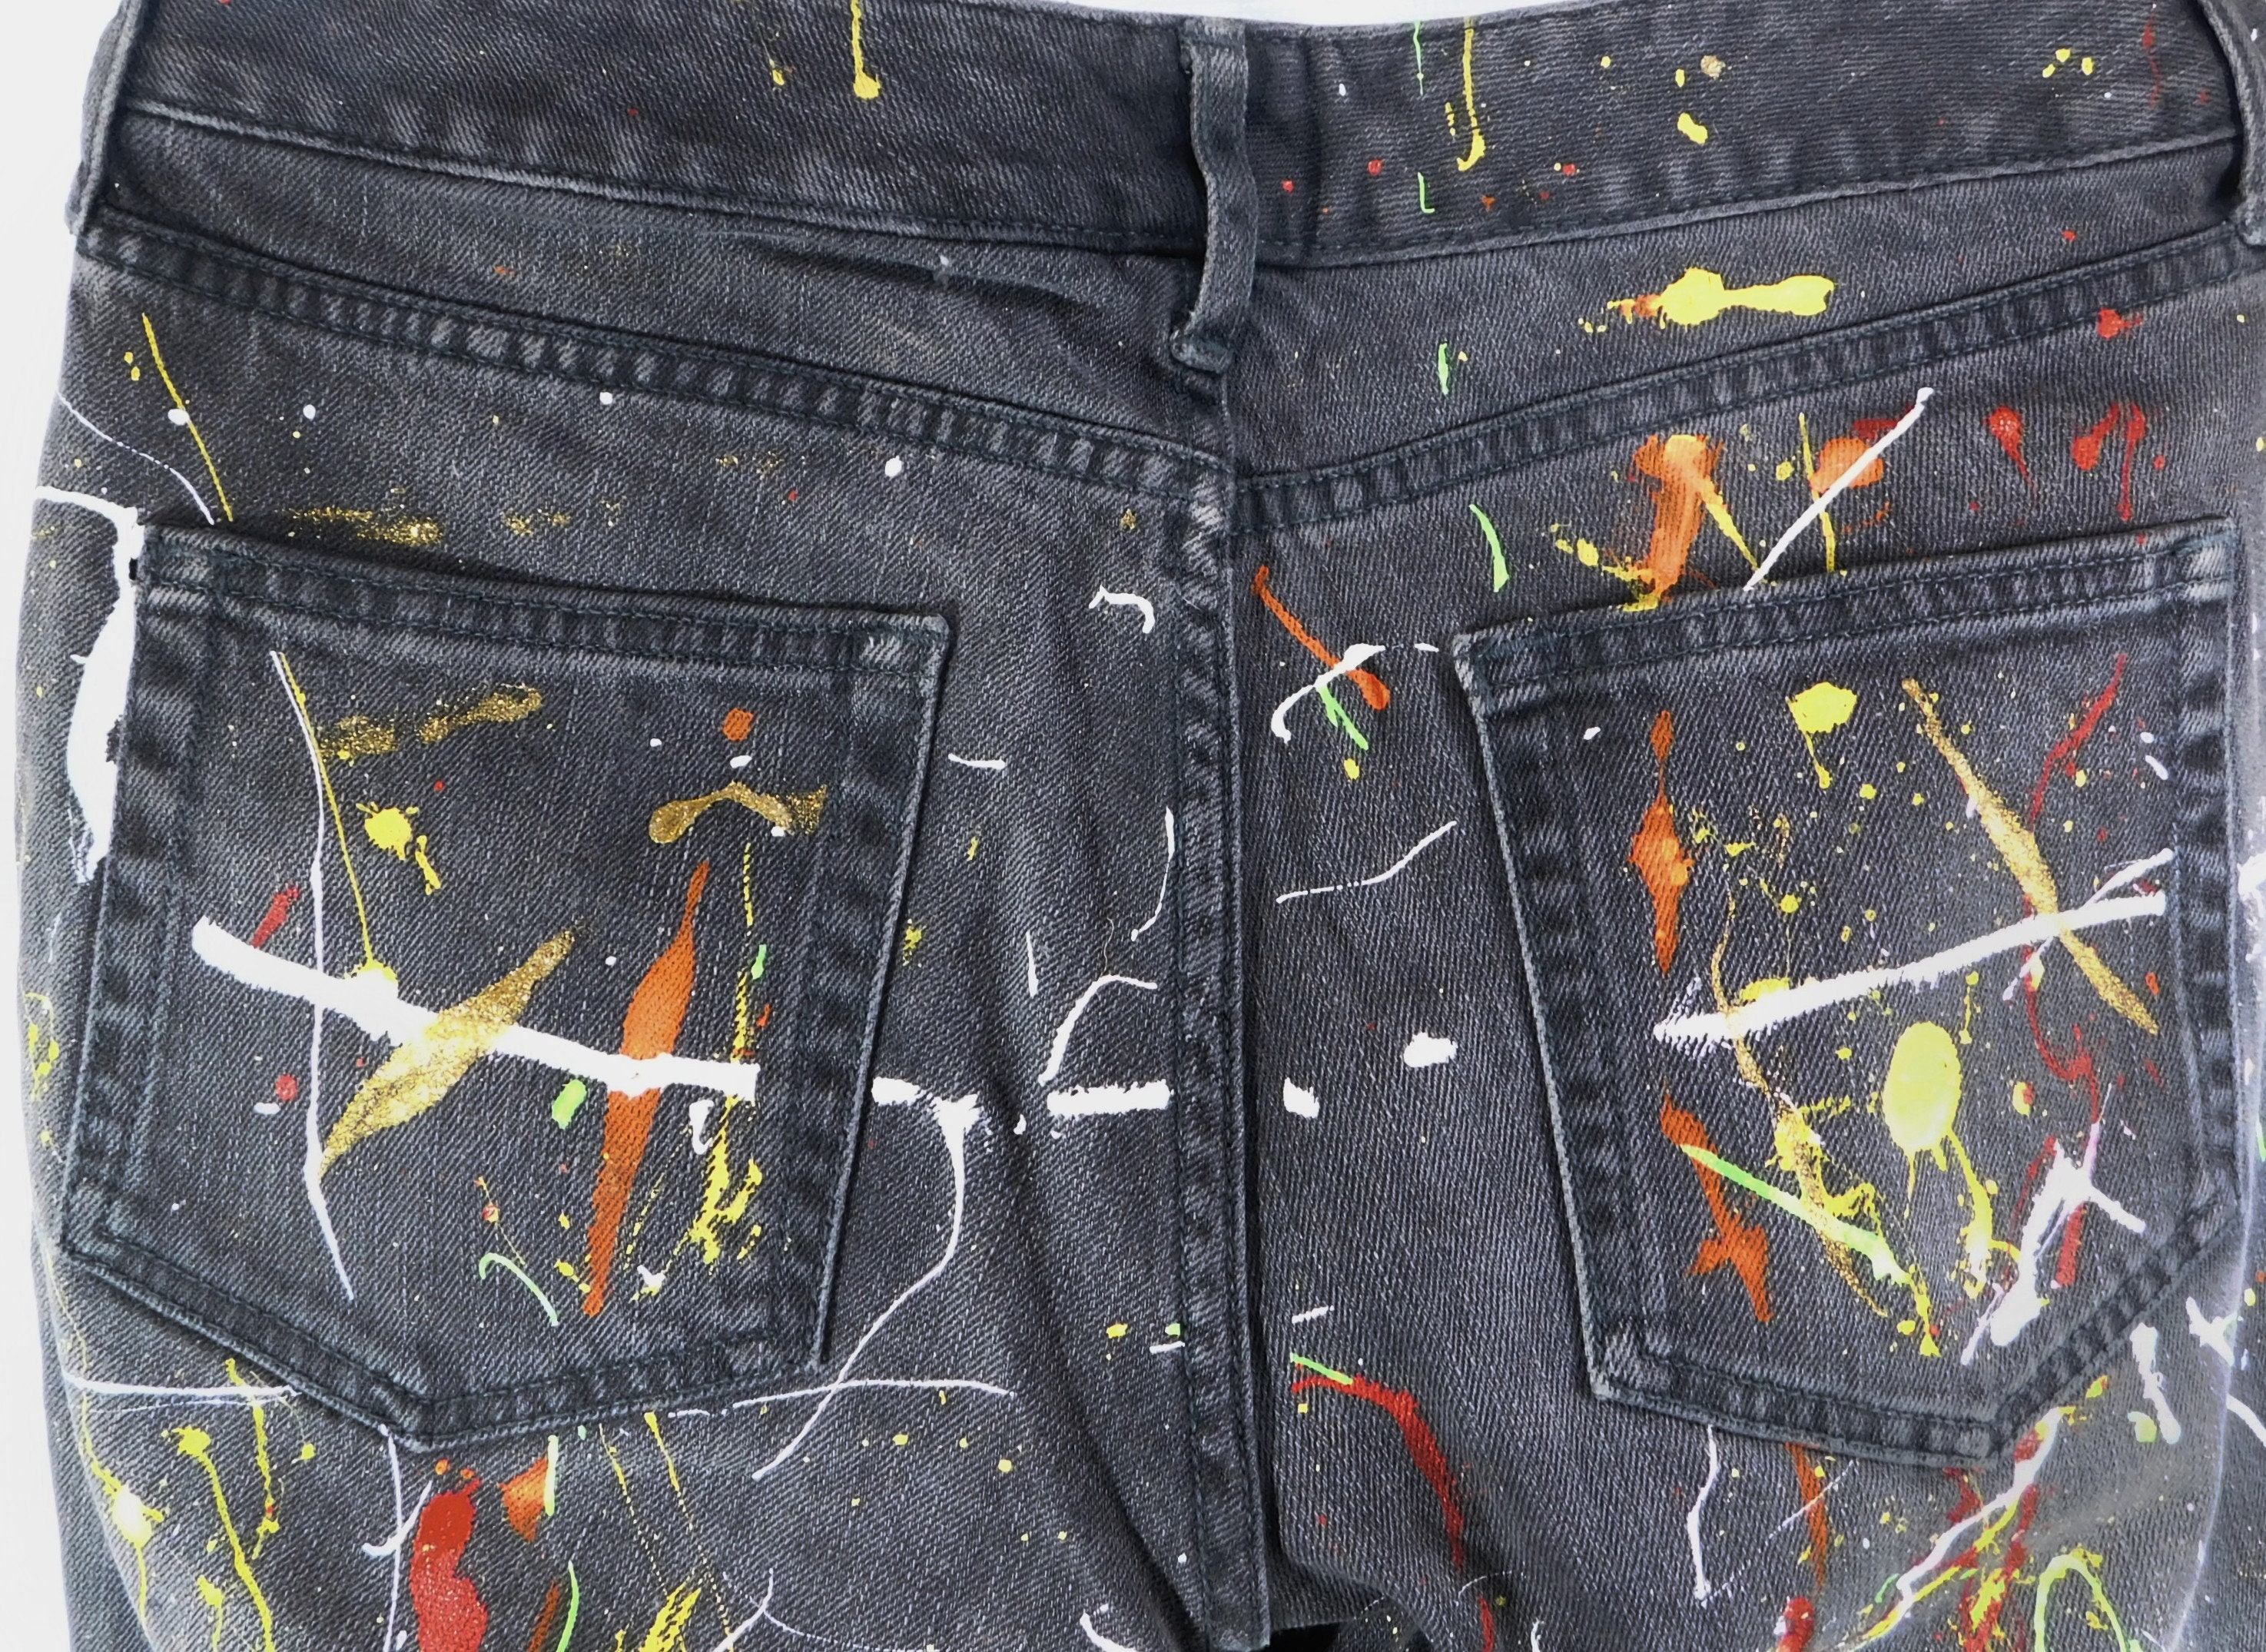 Hand Painted Jeans for Women high Waisted Denim Jeans Size 12 paint  Splatter Jeans Festival Clothing paint Splash Jeans upcycled Jeans 